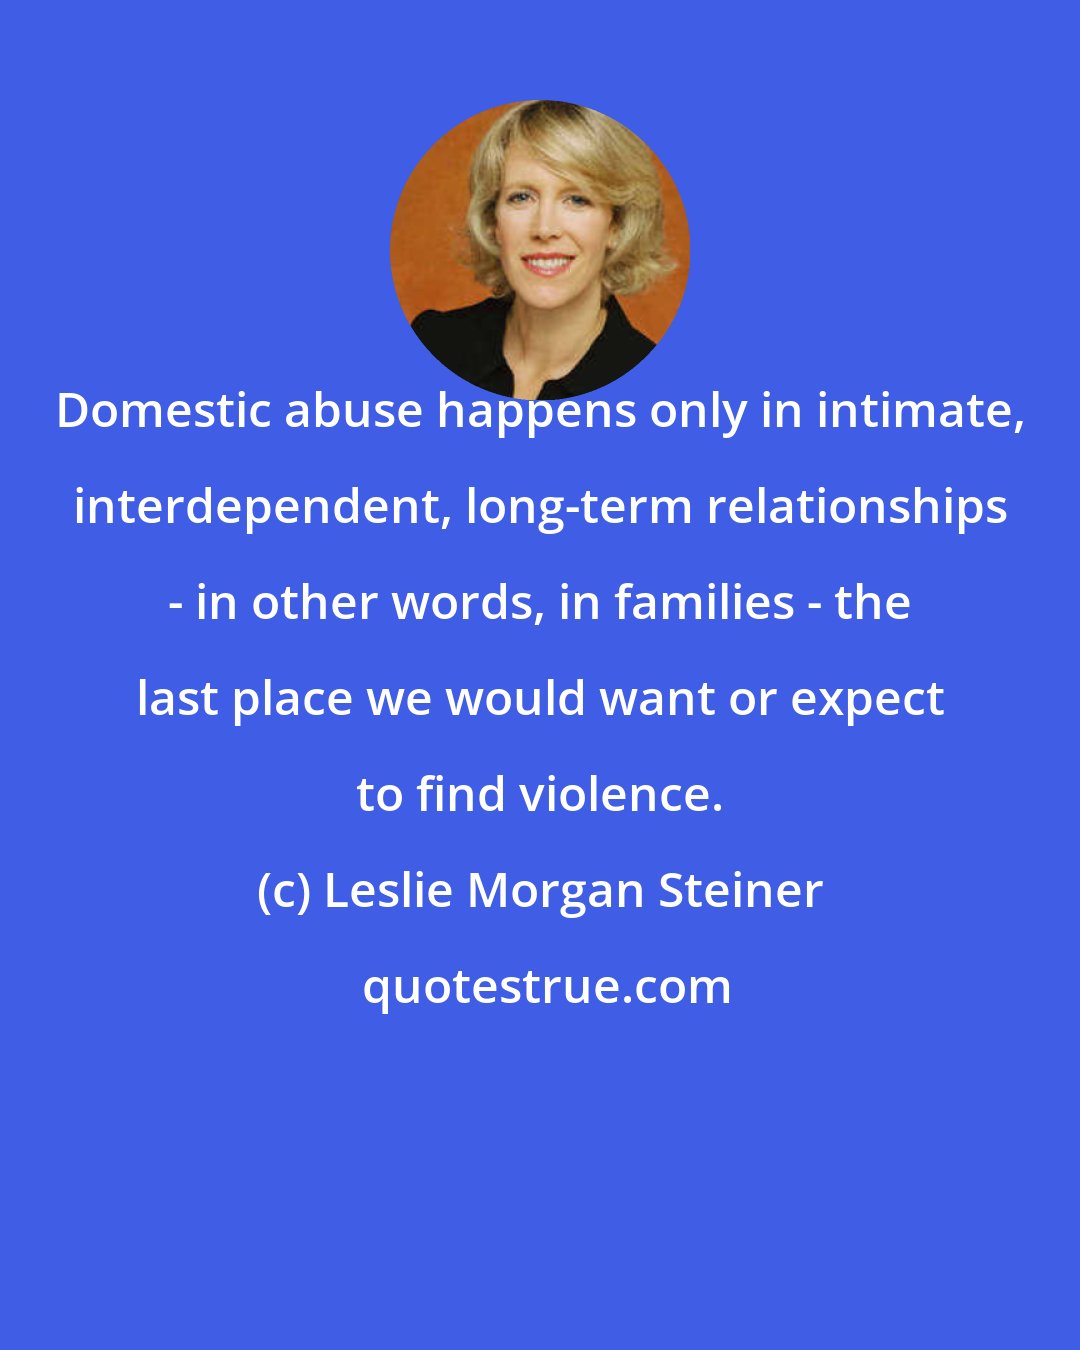 Leslie Morgan Steiner: Domestic abuse happens only in intimate, interdependent, long-term relationships - in other words, in families - the last place we would want or expect to find violence.